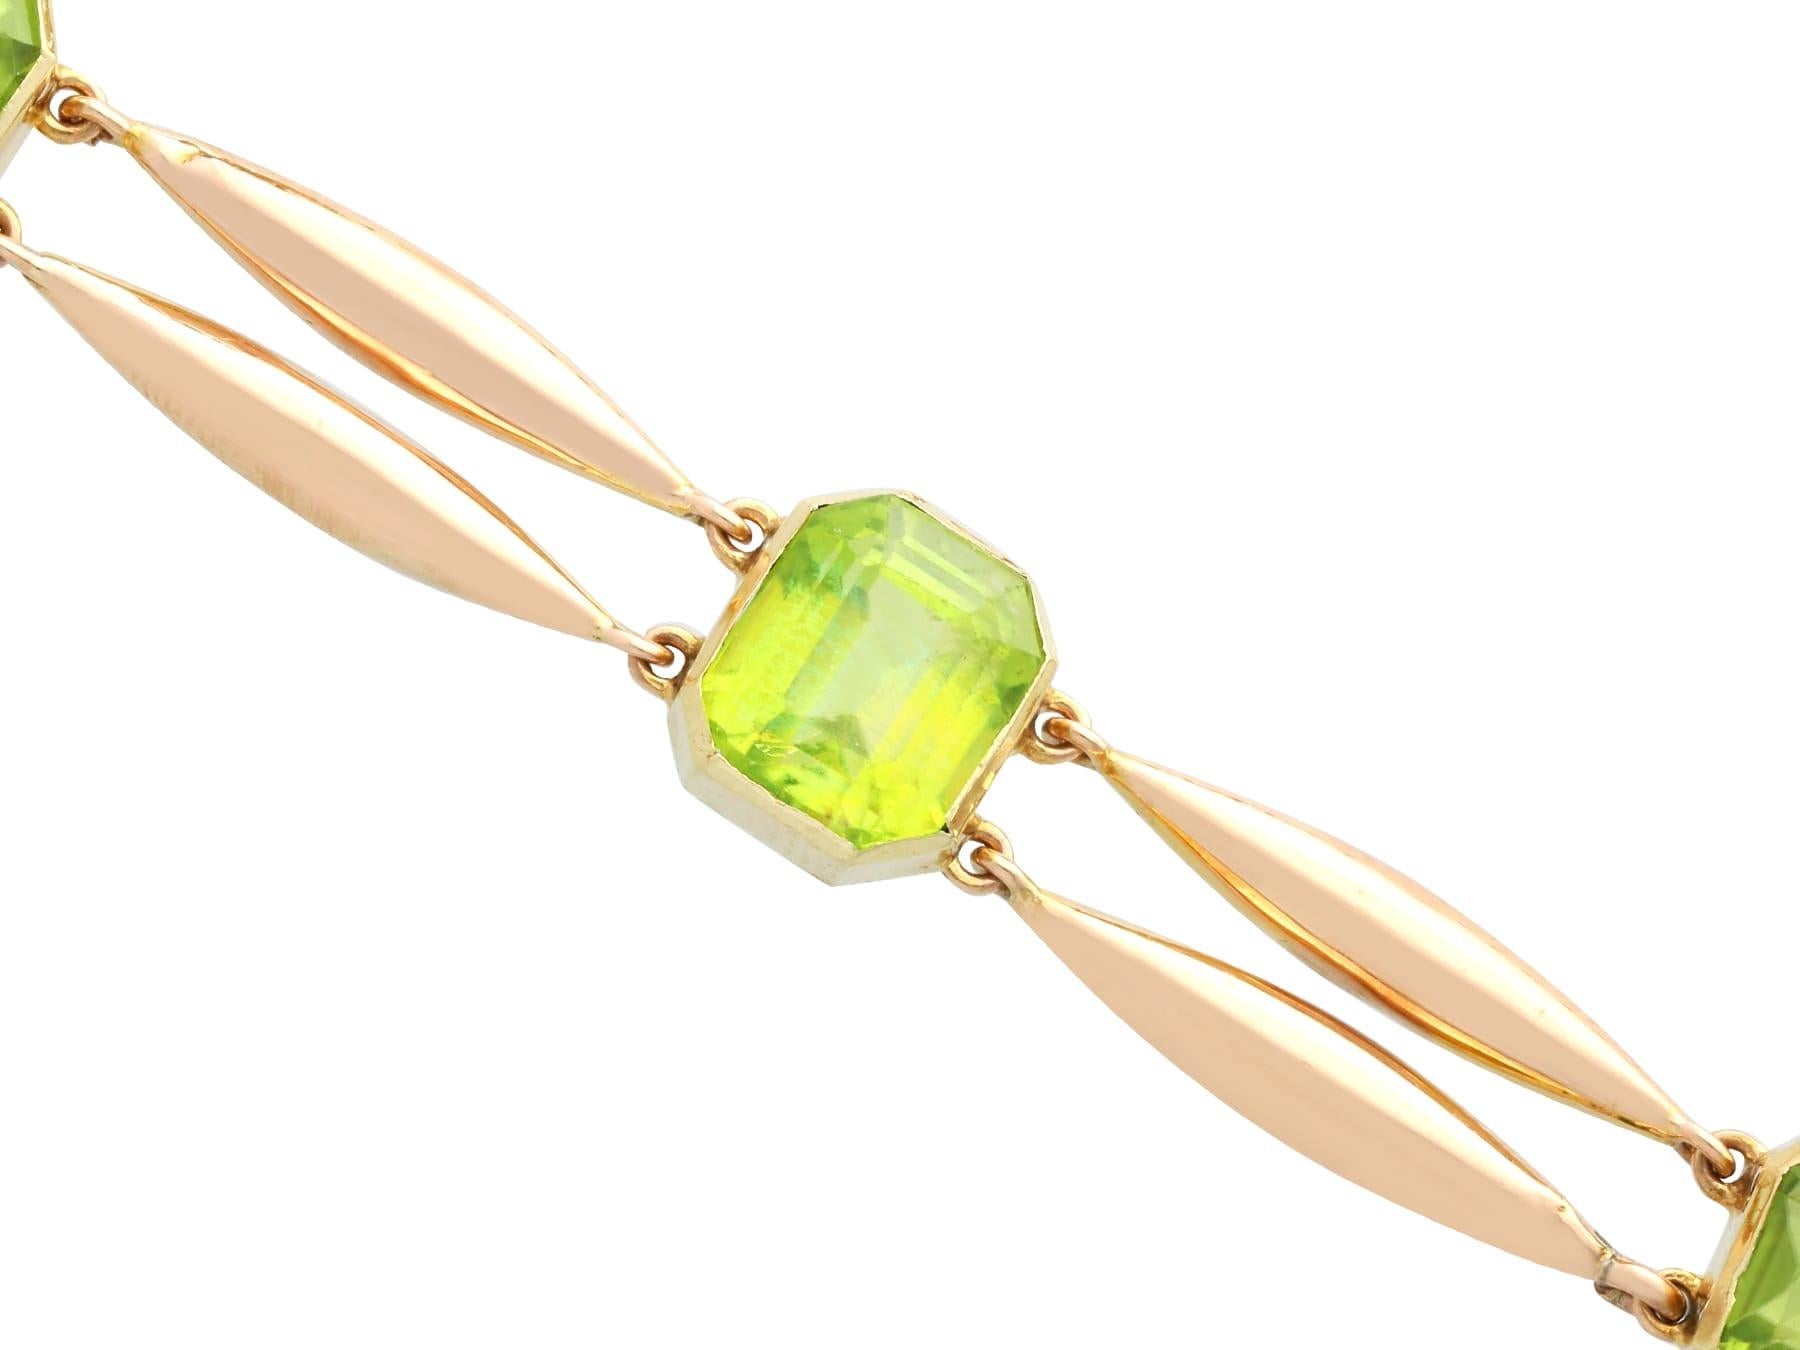 Antique 17.50ct Peridot and Rose Gold Bracelet In Excellent Condition For Sale In Jesmond, Newcastle Upon Tyne